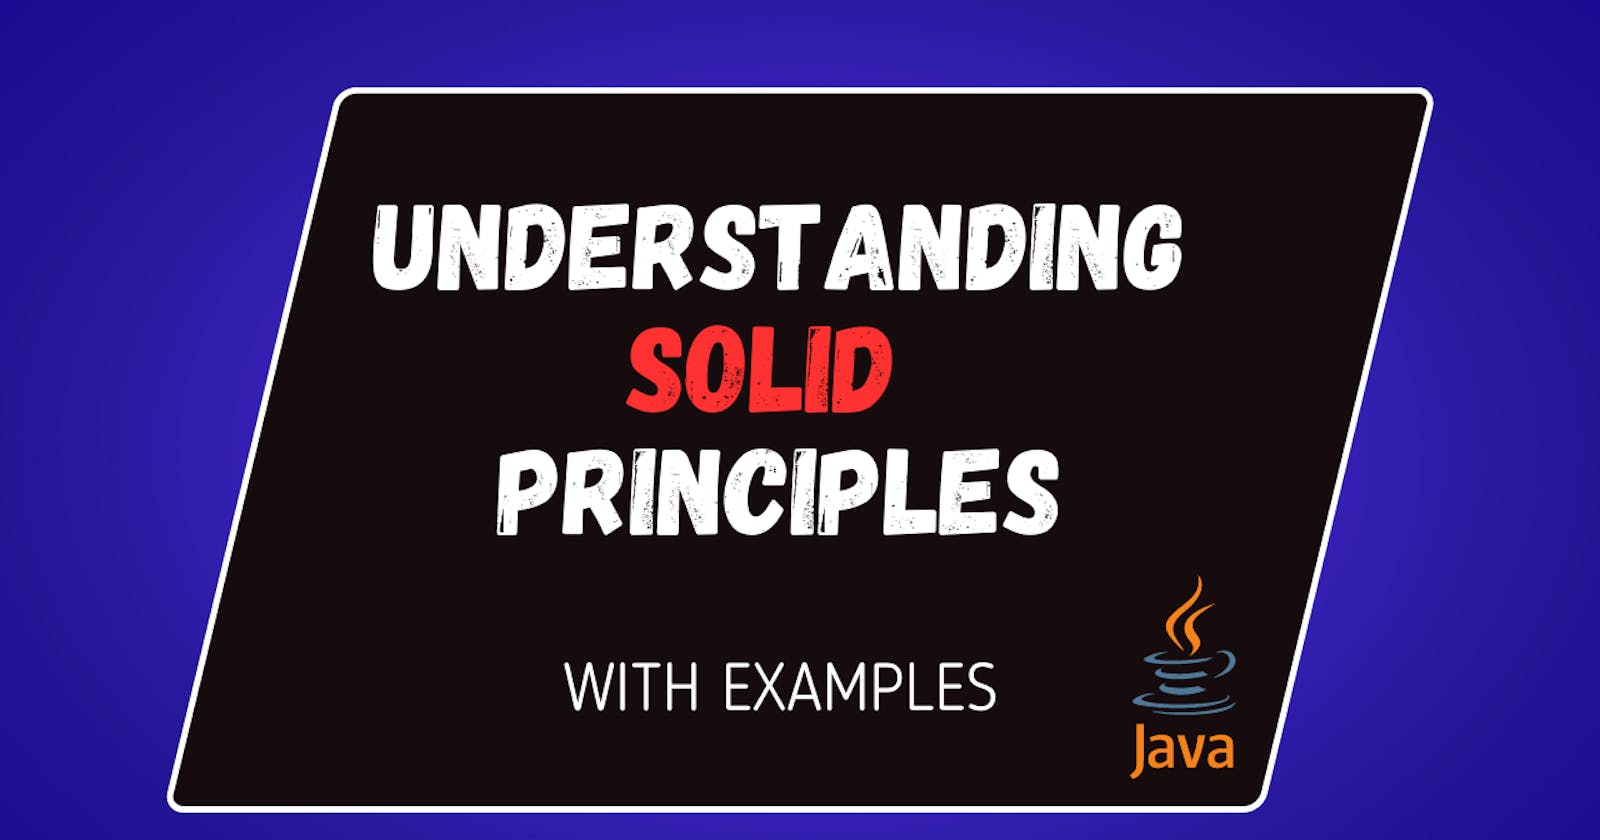 Getting Started with SOLID Principles: A Beginner's Guide